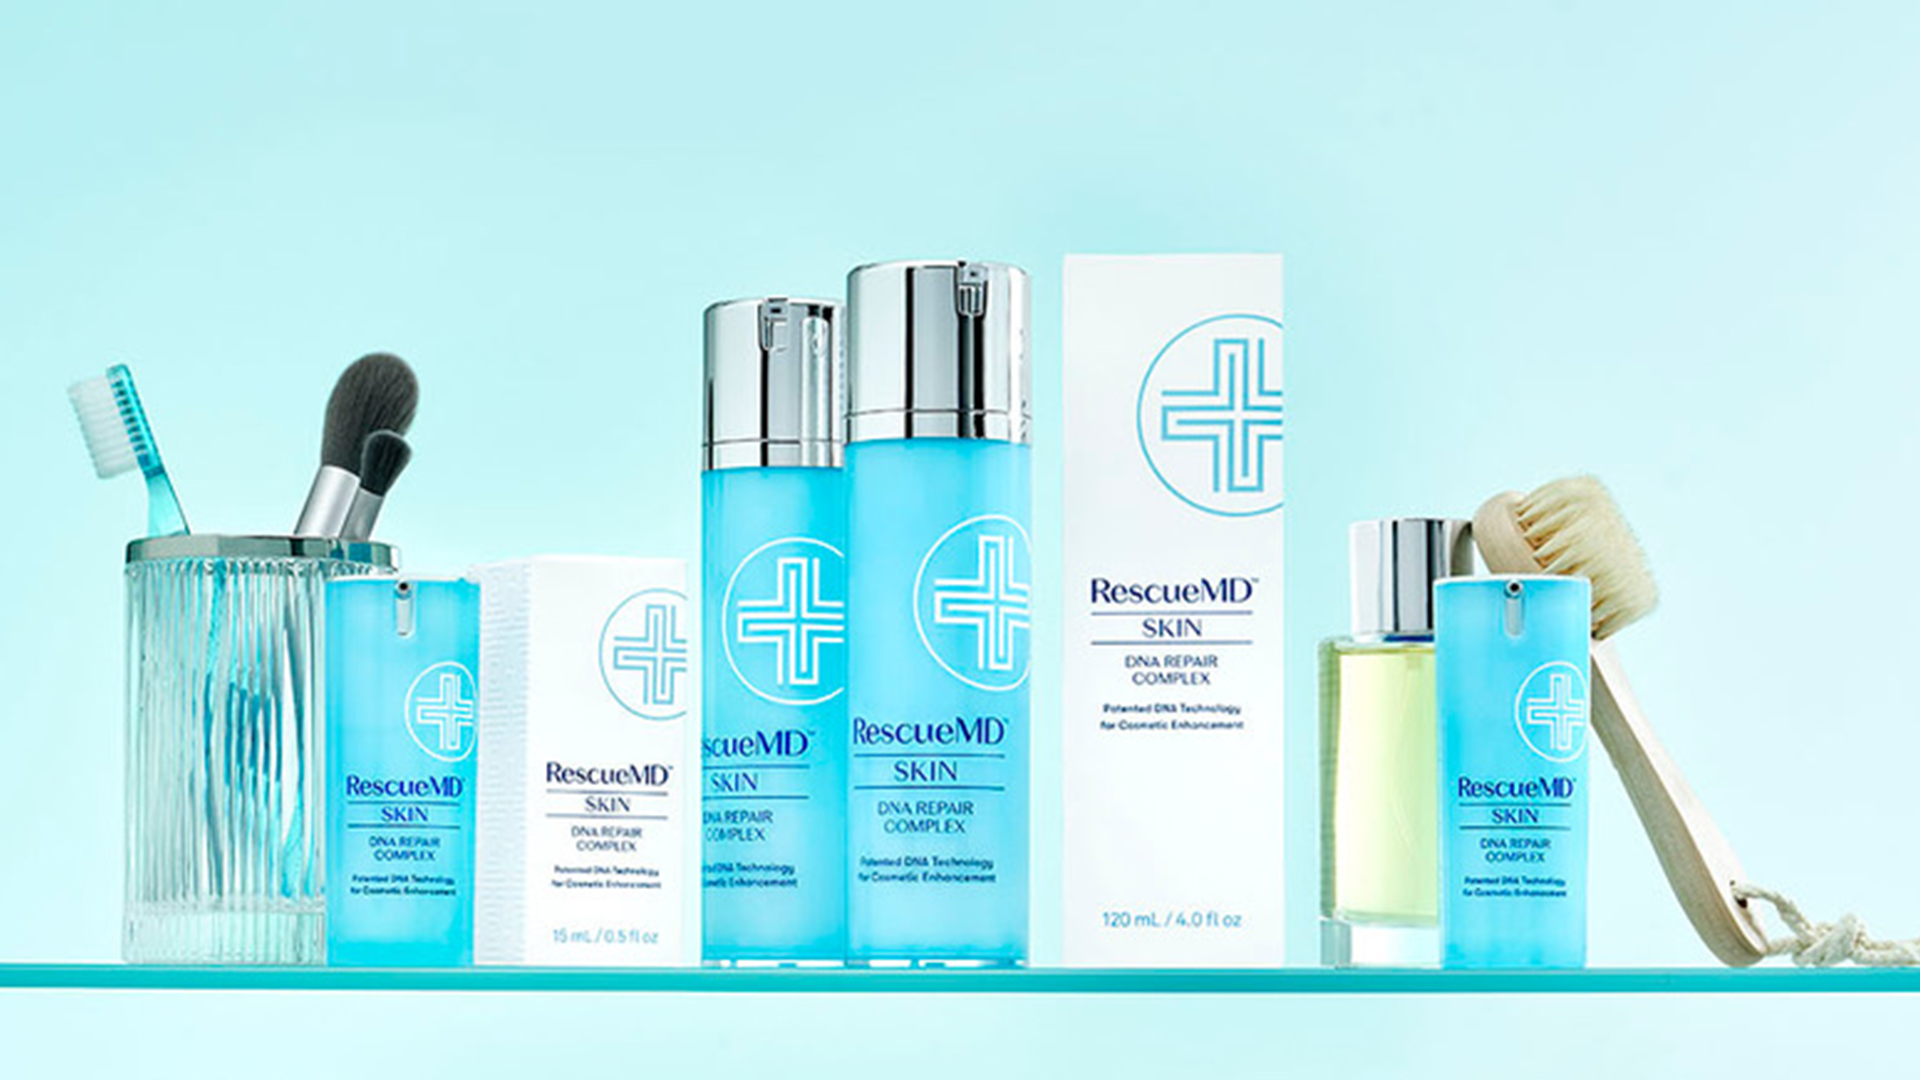 A landscape image showcasing the variants and packaging of RescueMD serum. The image features white and sky blue colors predominantly, with various packaging options displayed, including glass jars with brushed finishes